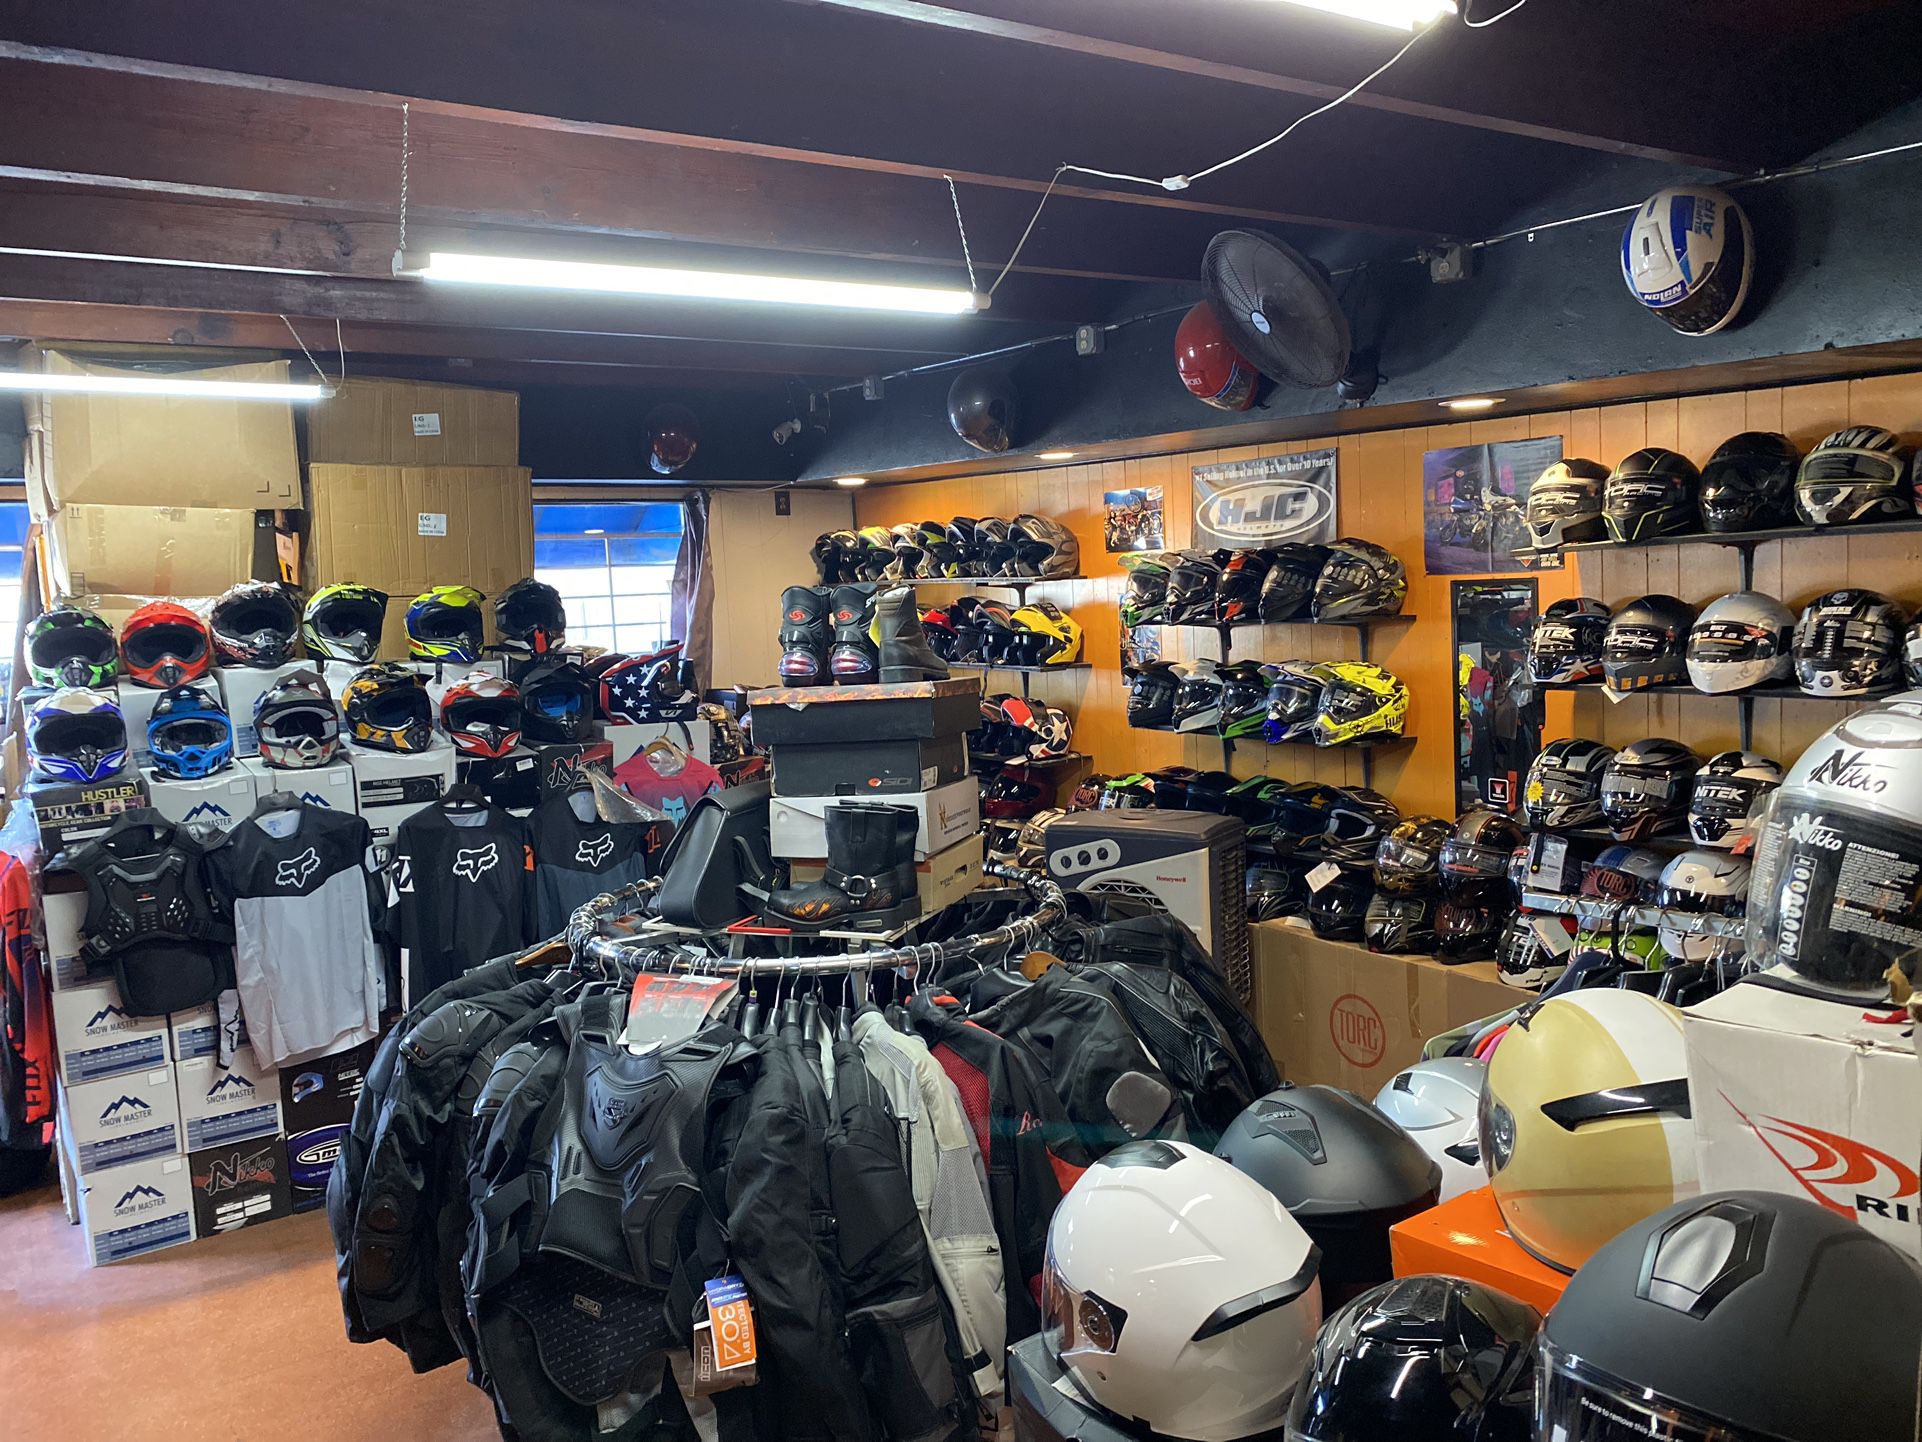 Motorcycle Helmets Jacket Gloves And More $50+__13456 Telegraph Road Whittier 